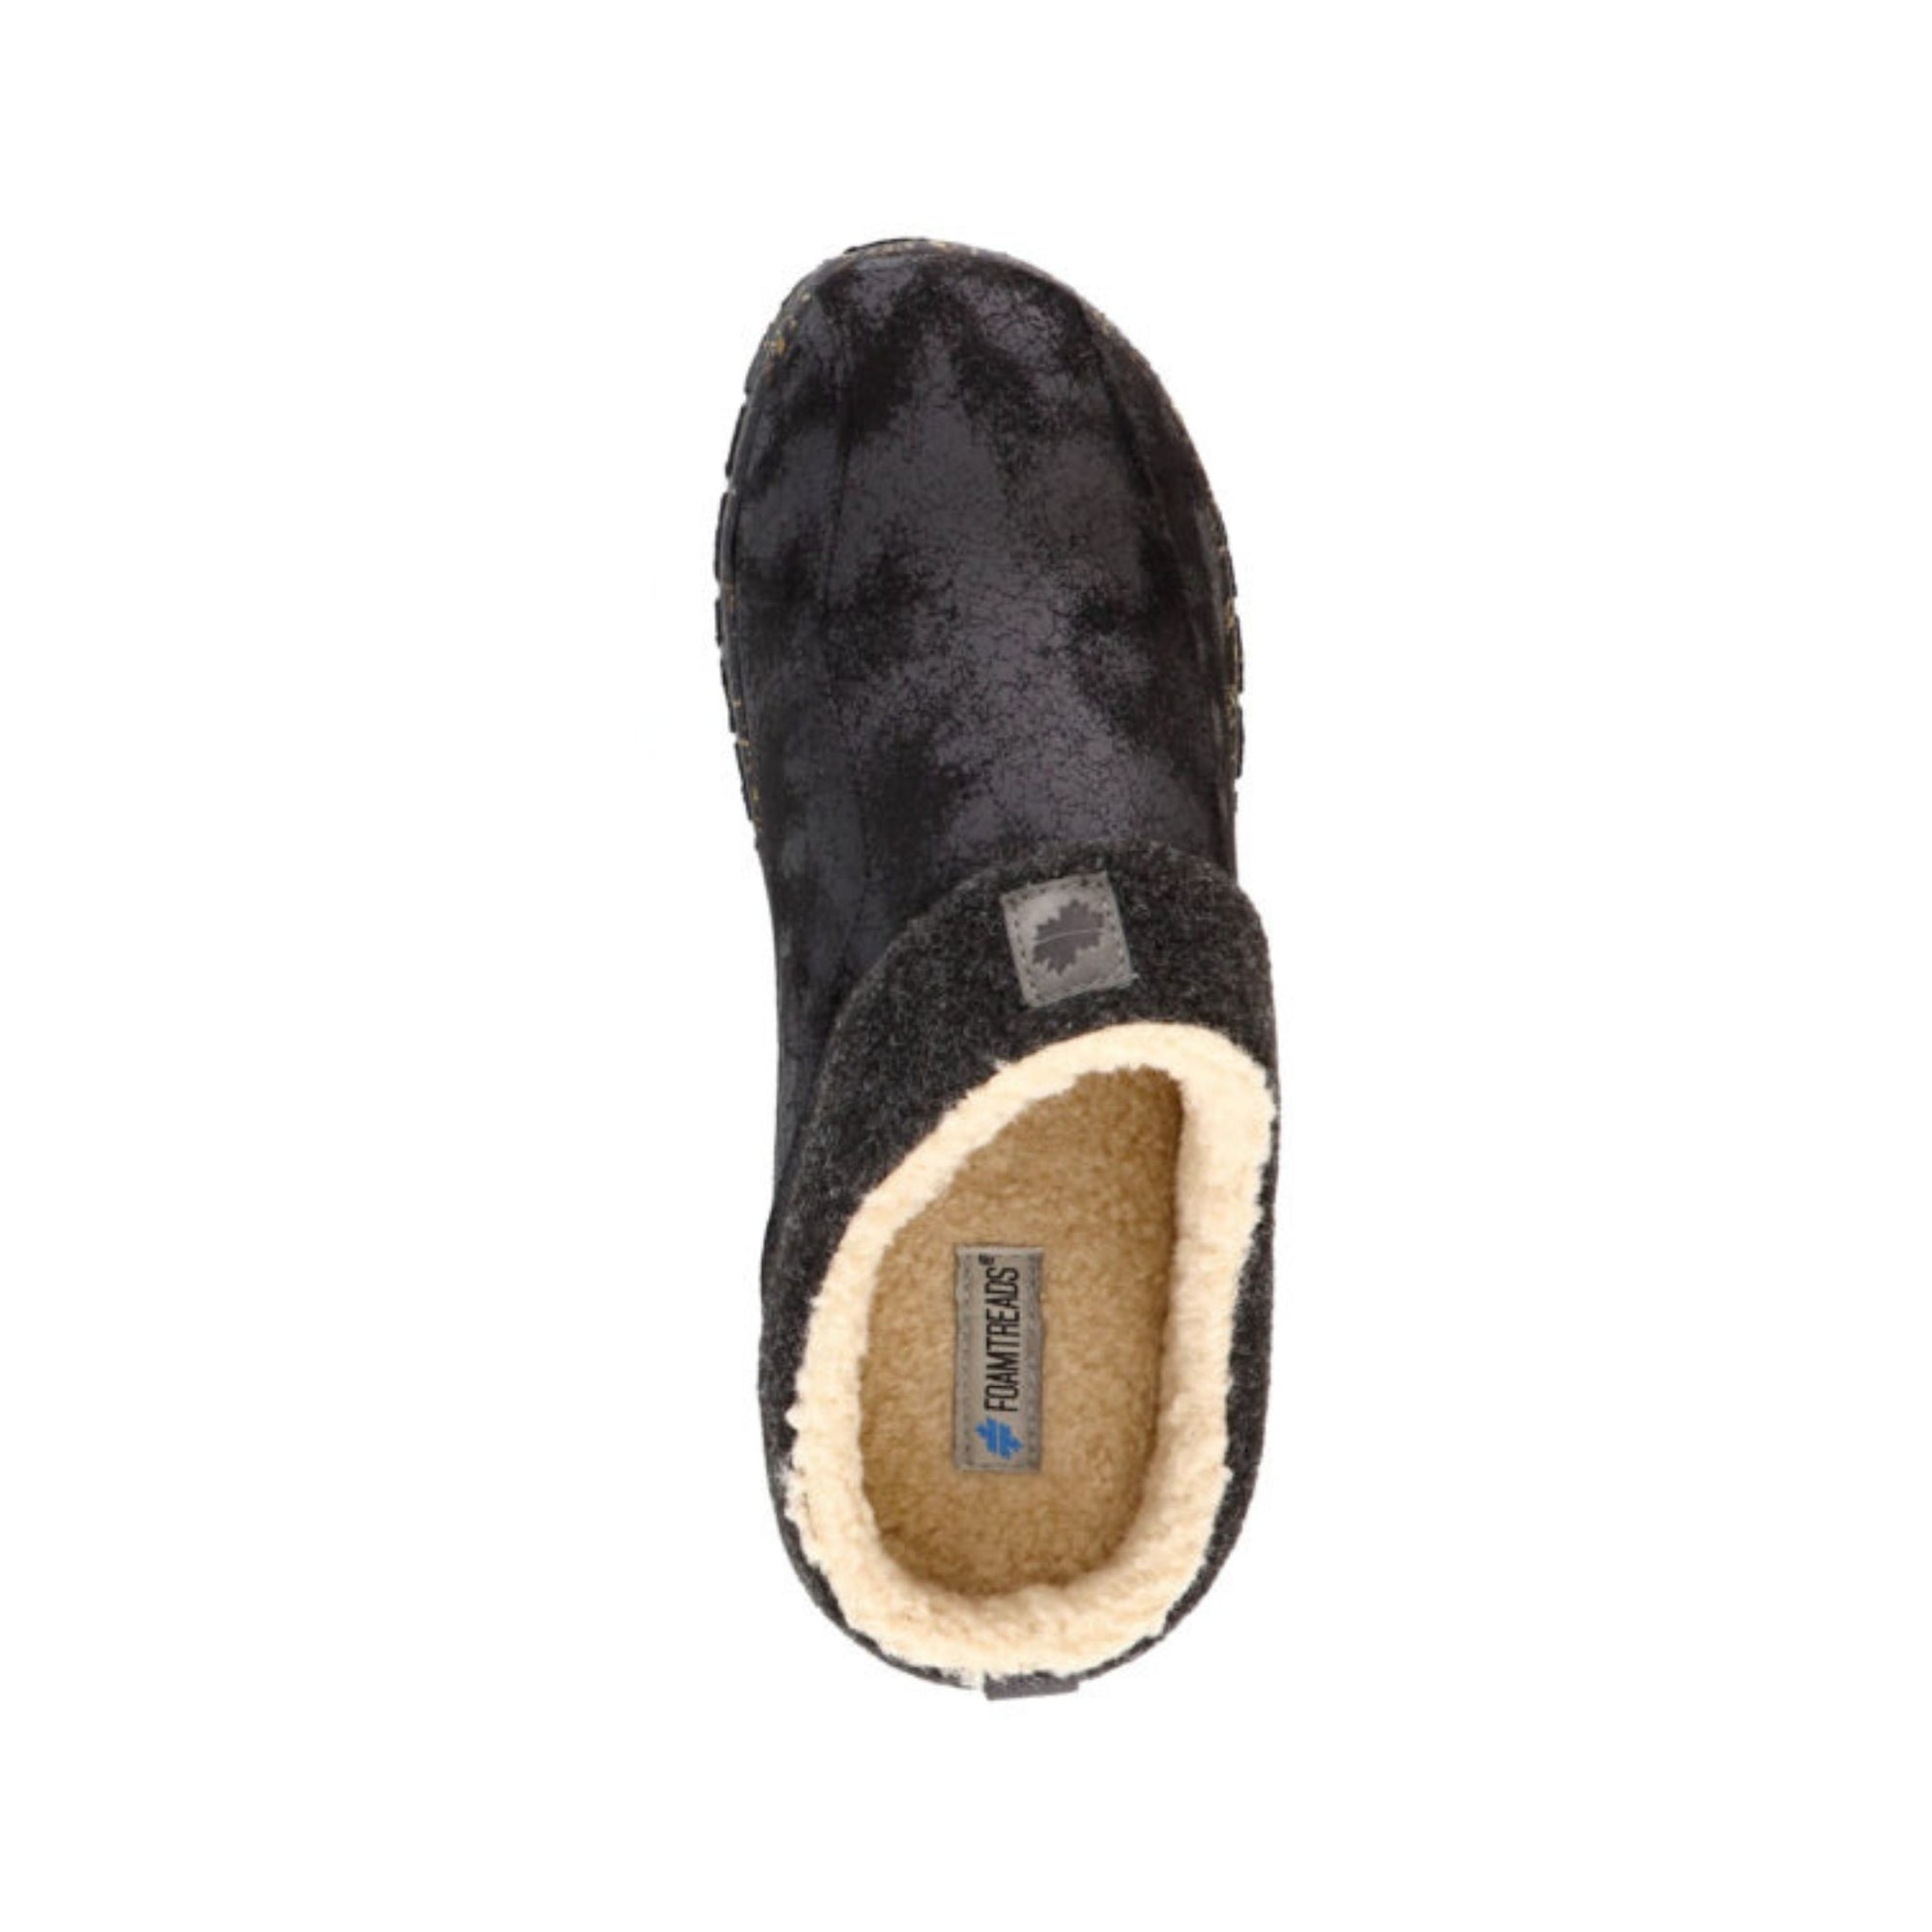 Top view of the Lucas 2 Slipper in black. Lining is beige with Foamtreads logo visible on the insole. 